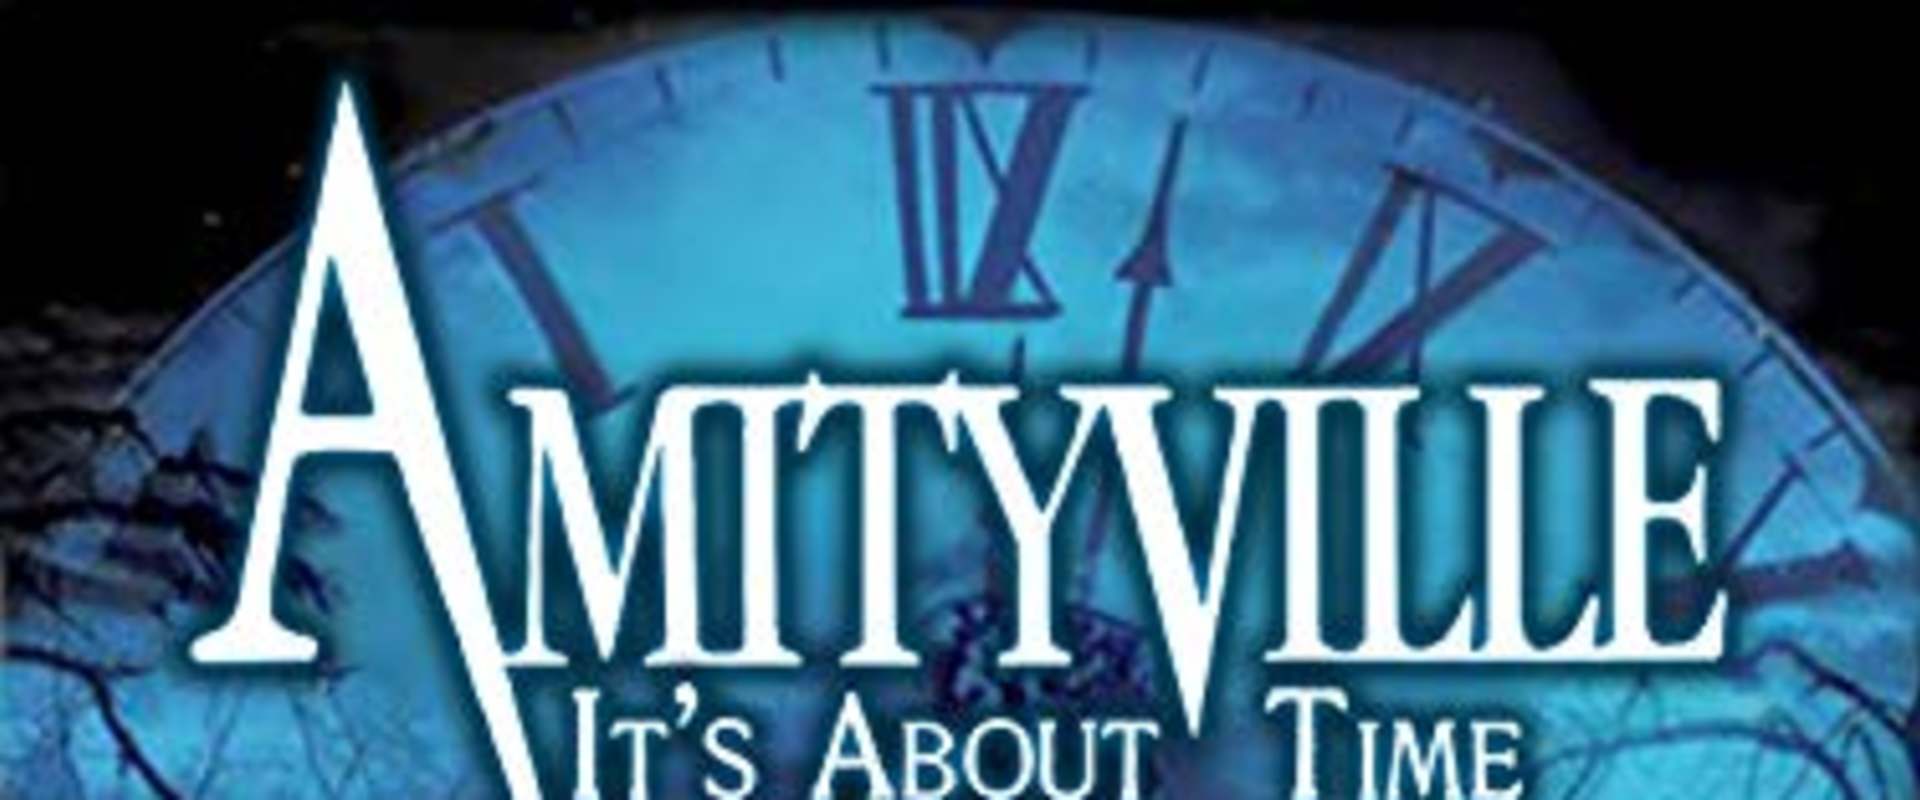 Amityville 1992: It's About Time background 2